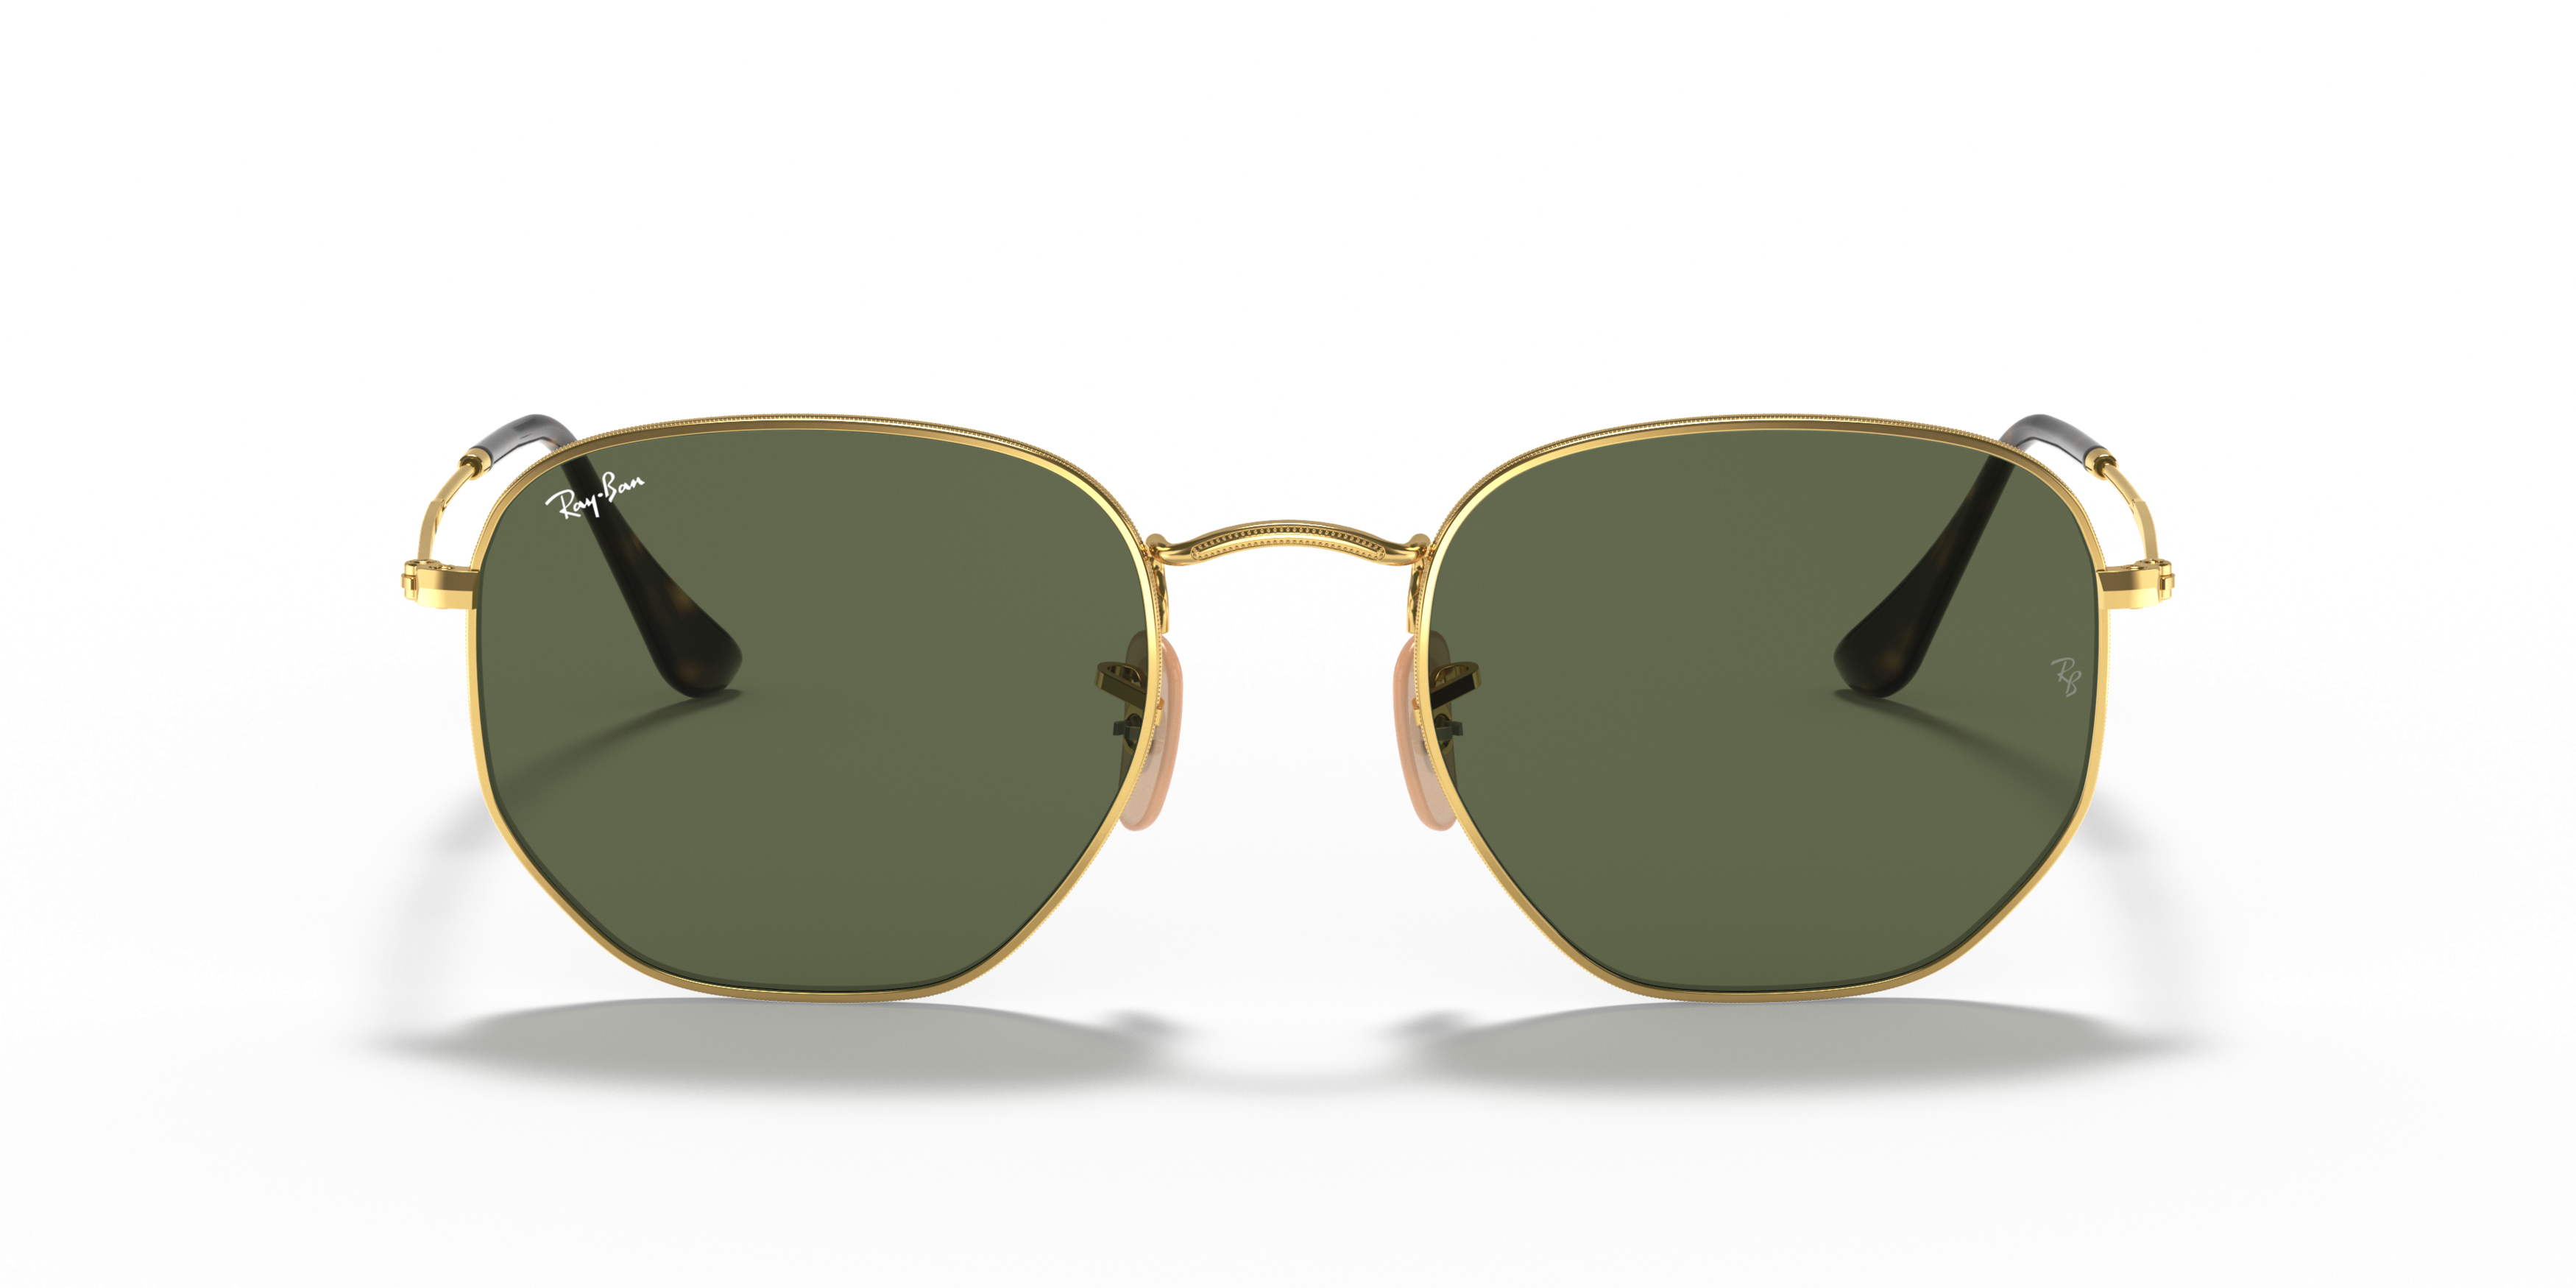 [products.image.front] Ray-Ban Hexagonal RB3548N 001/51